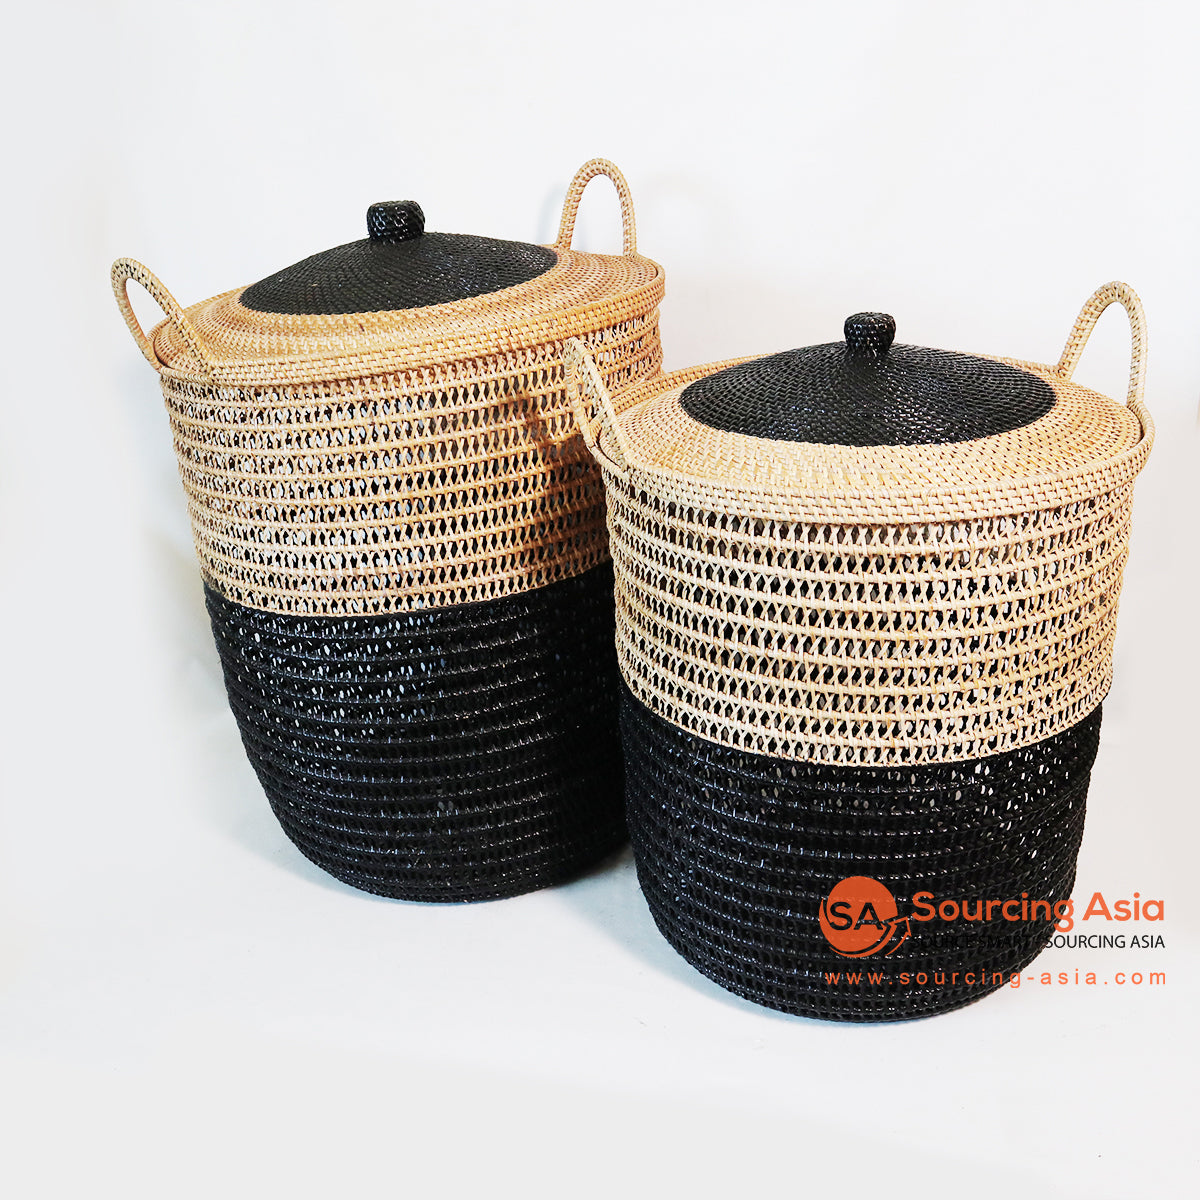 MTIC058-2 SET OF TWO NATURAL AND BLACK WOVEN RATTAN BASKETS WITH LID AND HANDLE